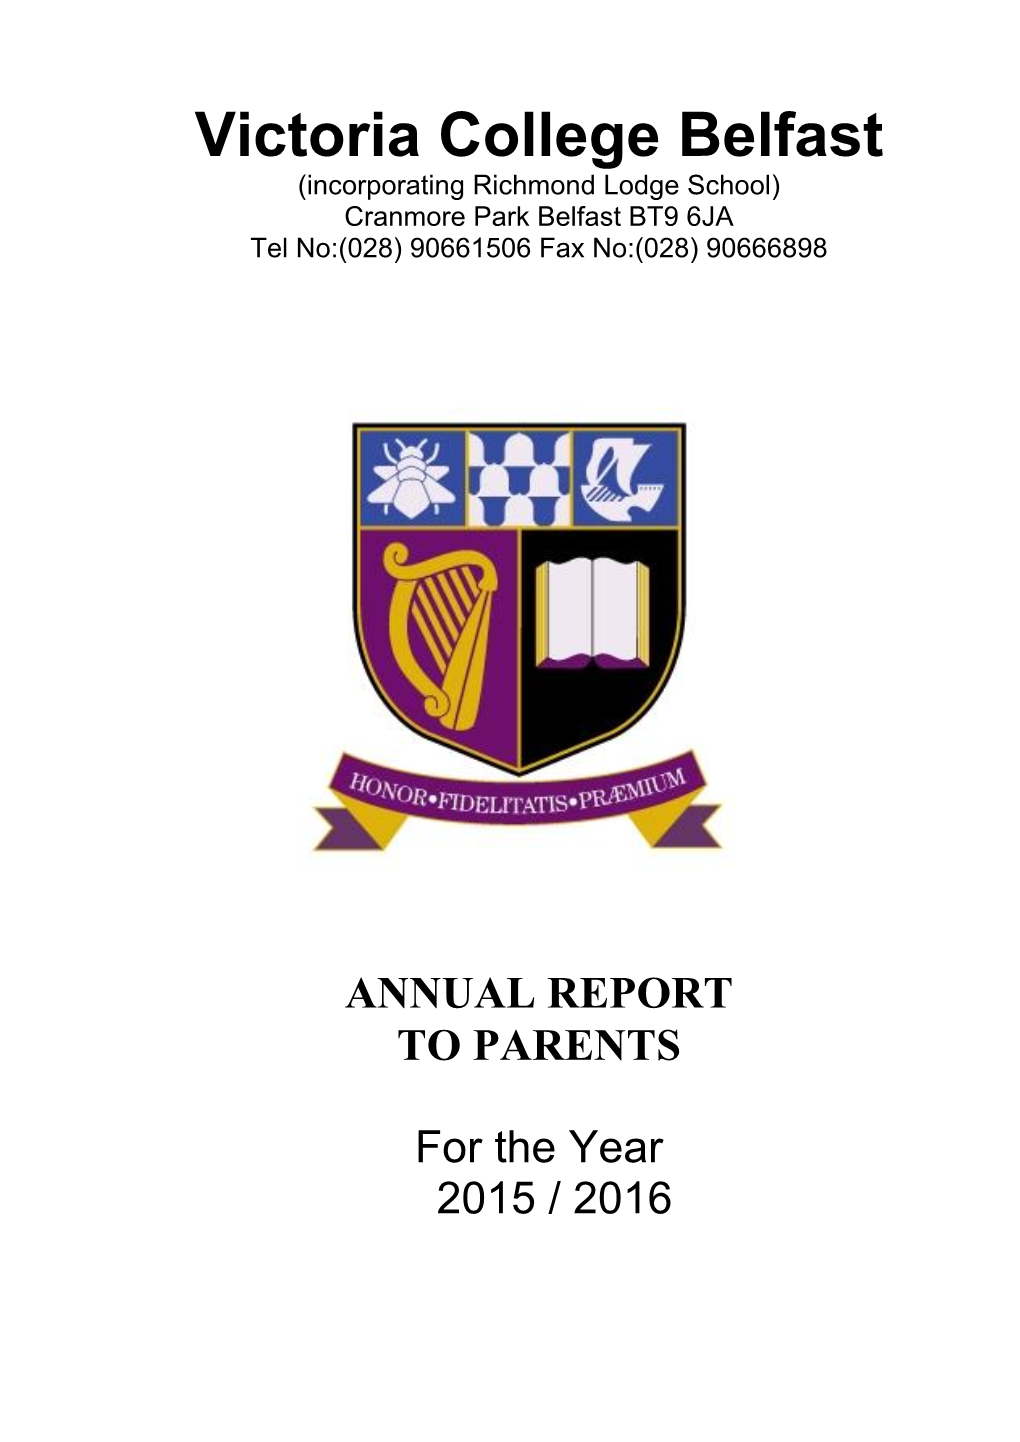 ANNUAL REPORT to PARENTS for the Year 2015 / 2016